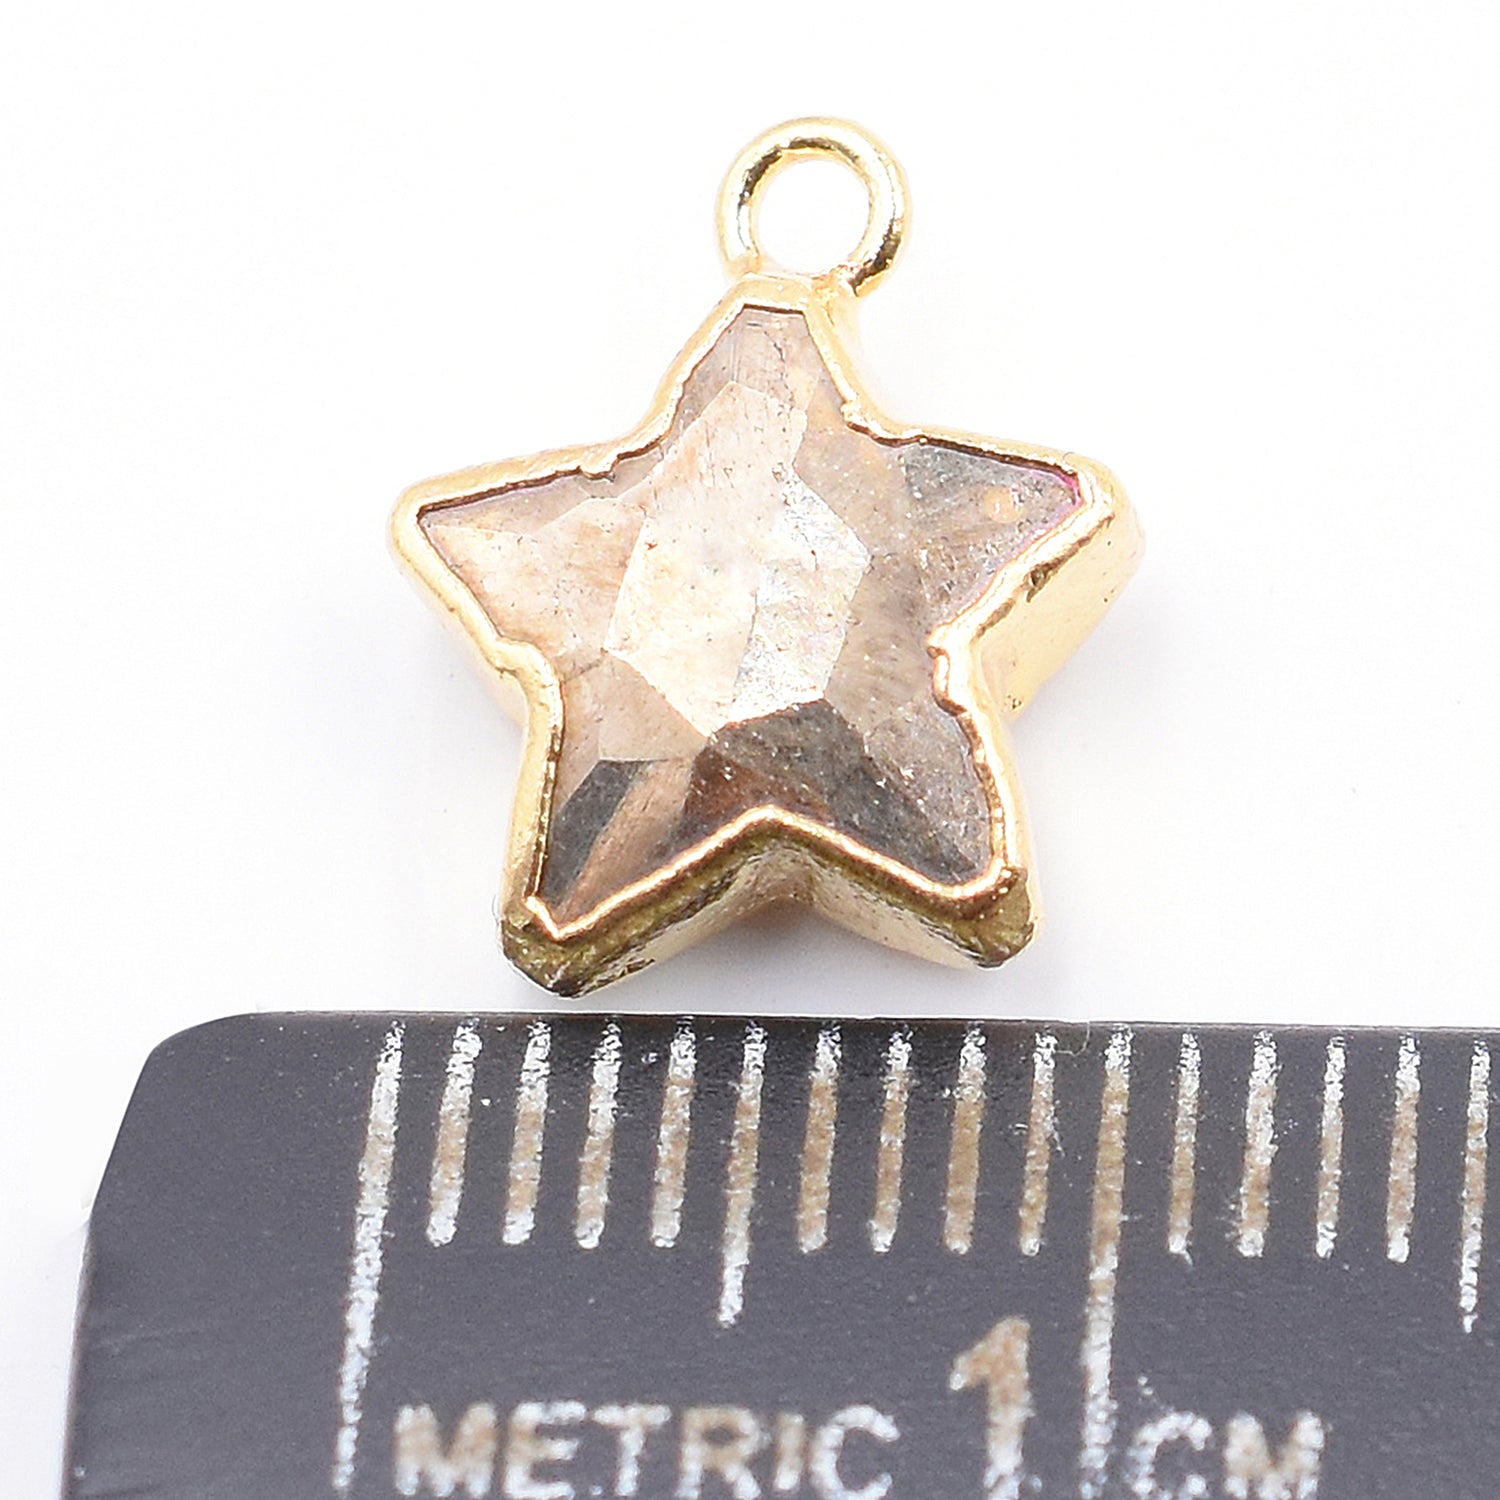 Pyrite 10 To 11 MM Star Shape Gold Electroplated Pendant (Set Of 2 Pcs)